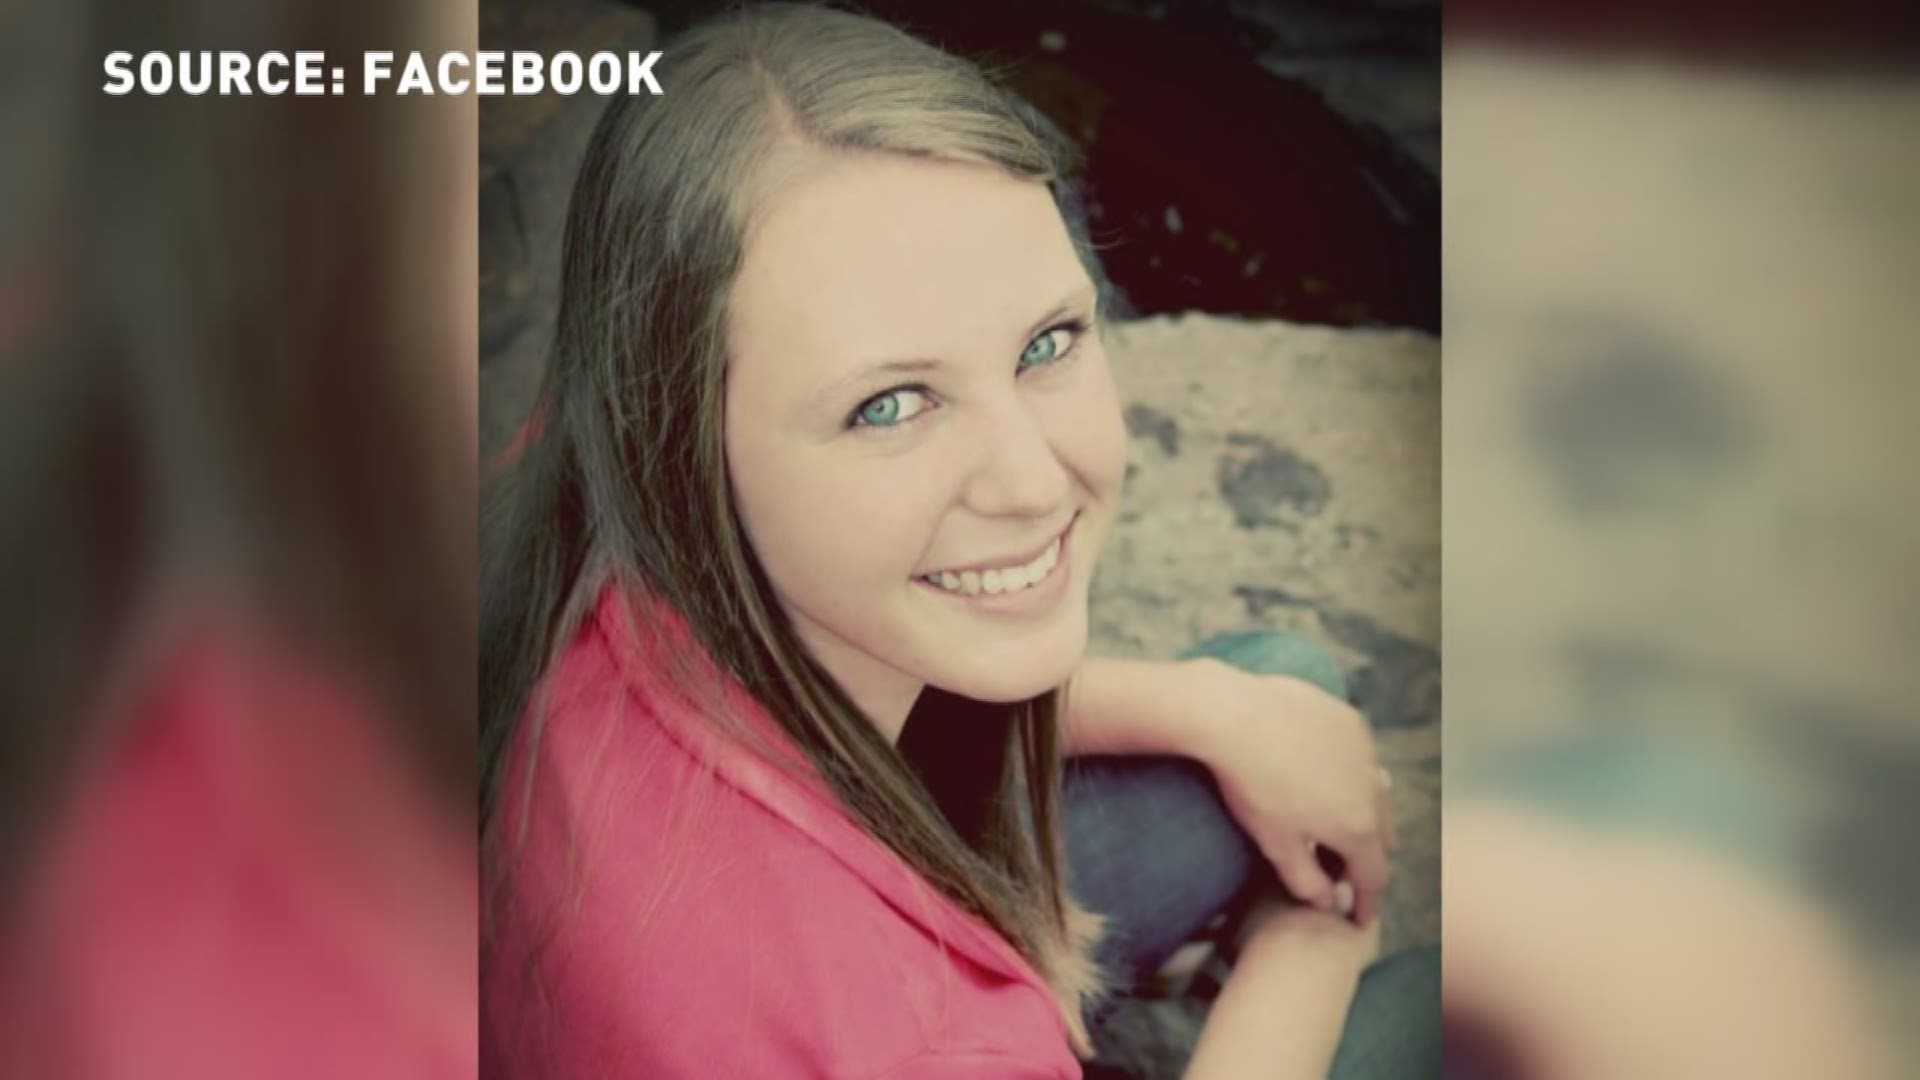 Tara Oskam, 21, was killed when a vehicle chased by Michigan State Police crashed into the vehicle Oskam was driving.